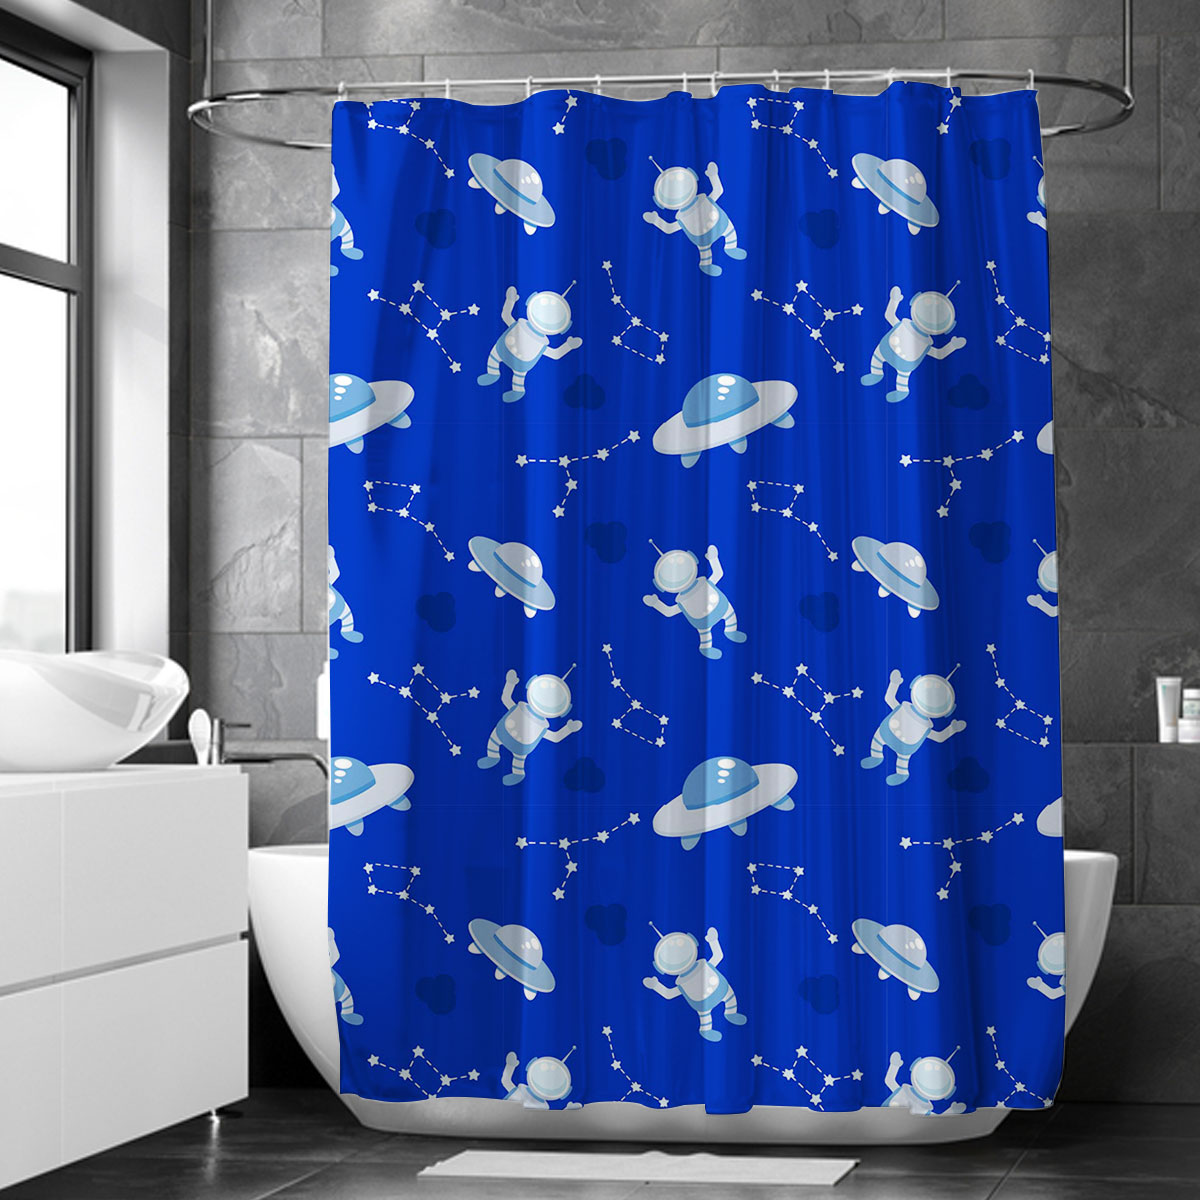 Astronauts Spaceships And Constellation Shower Curtain